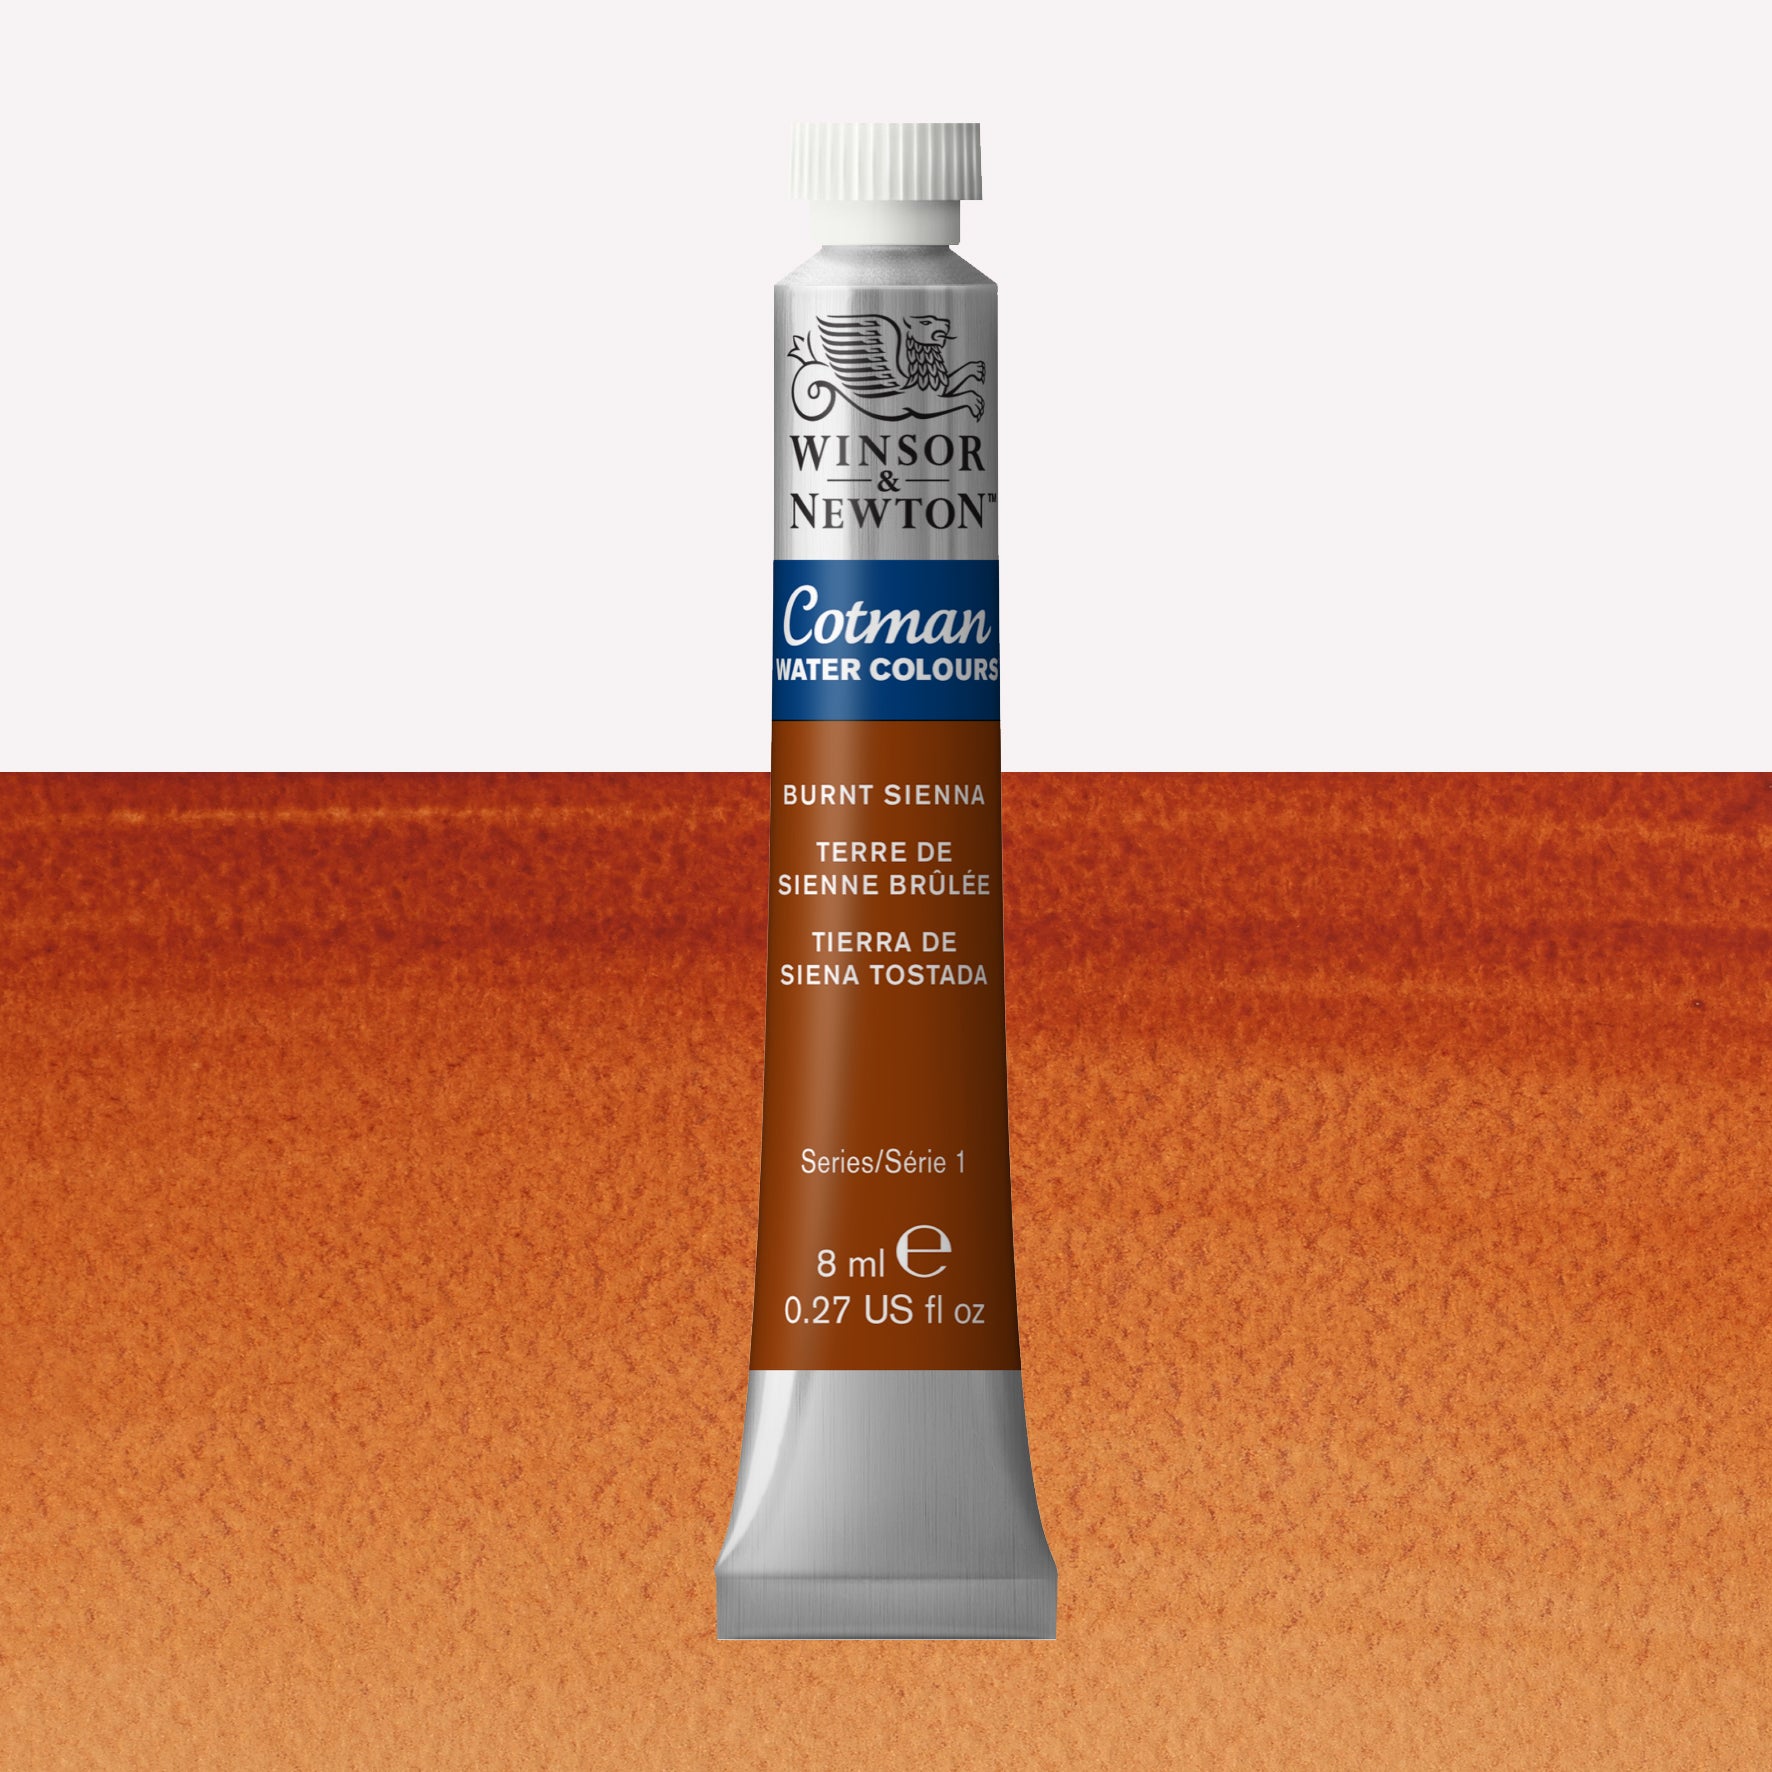 Winsor & Newton Cotman watercolour paint packaged in 8ml silver tube with a white lid in the shade Burnt Sienna  over a highly pigmented colour swatch.